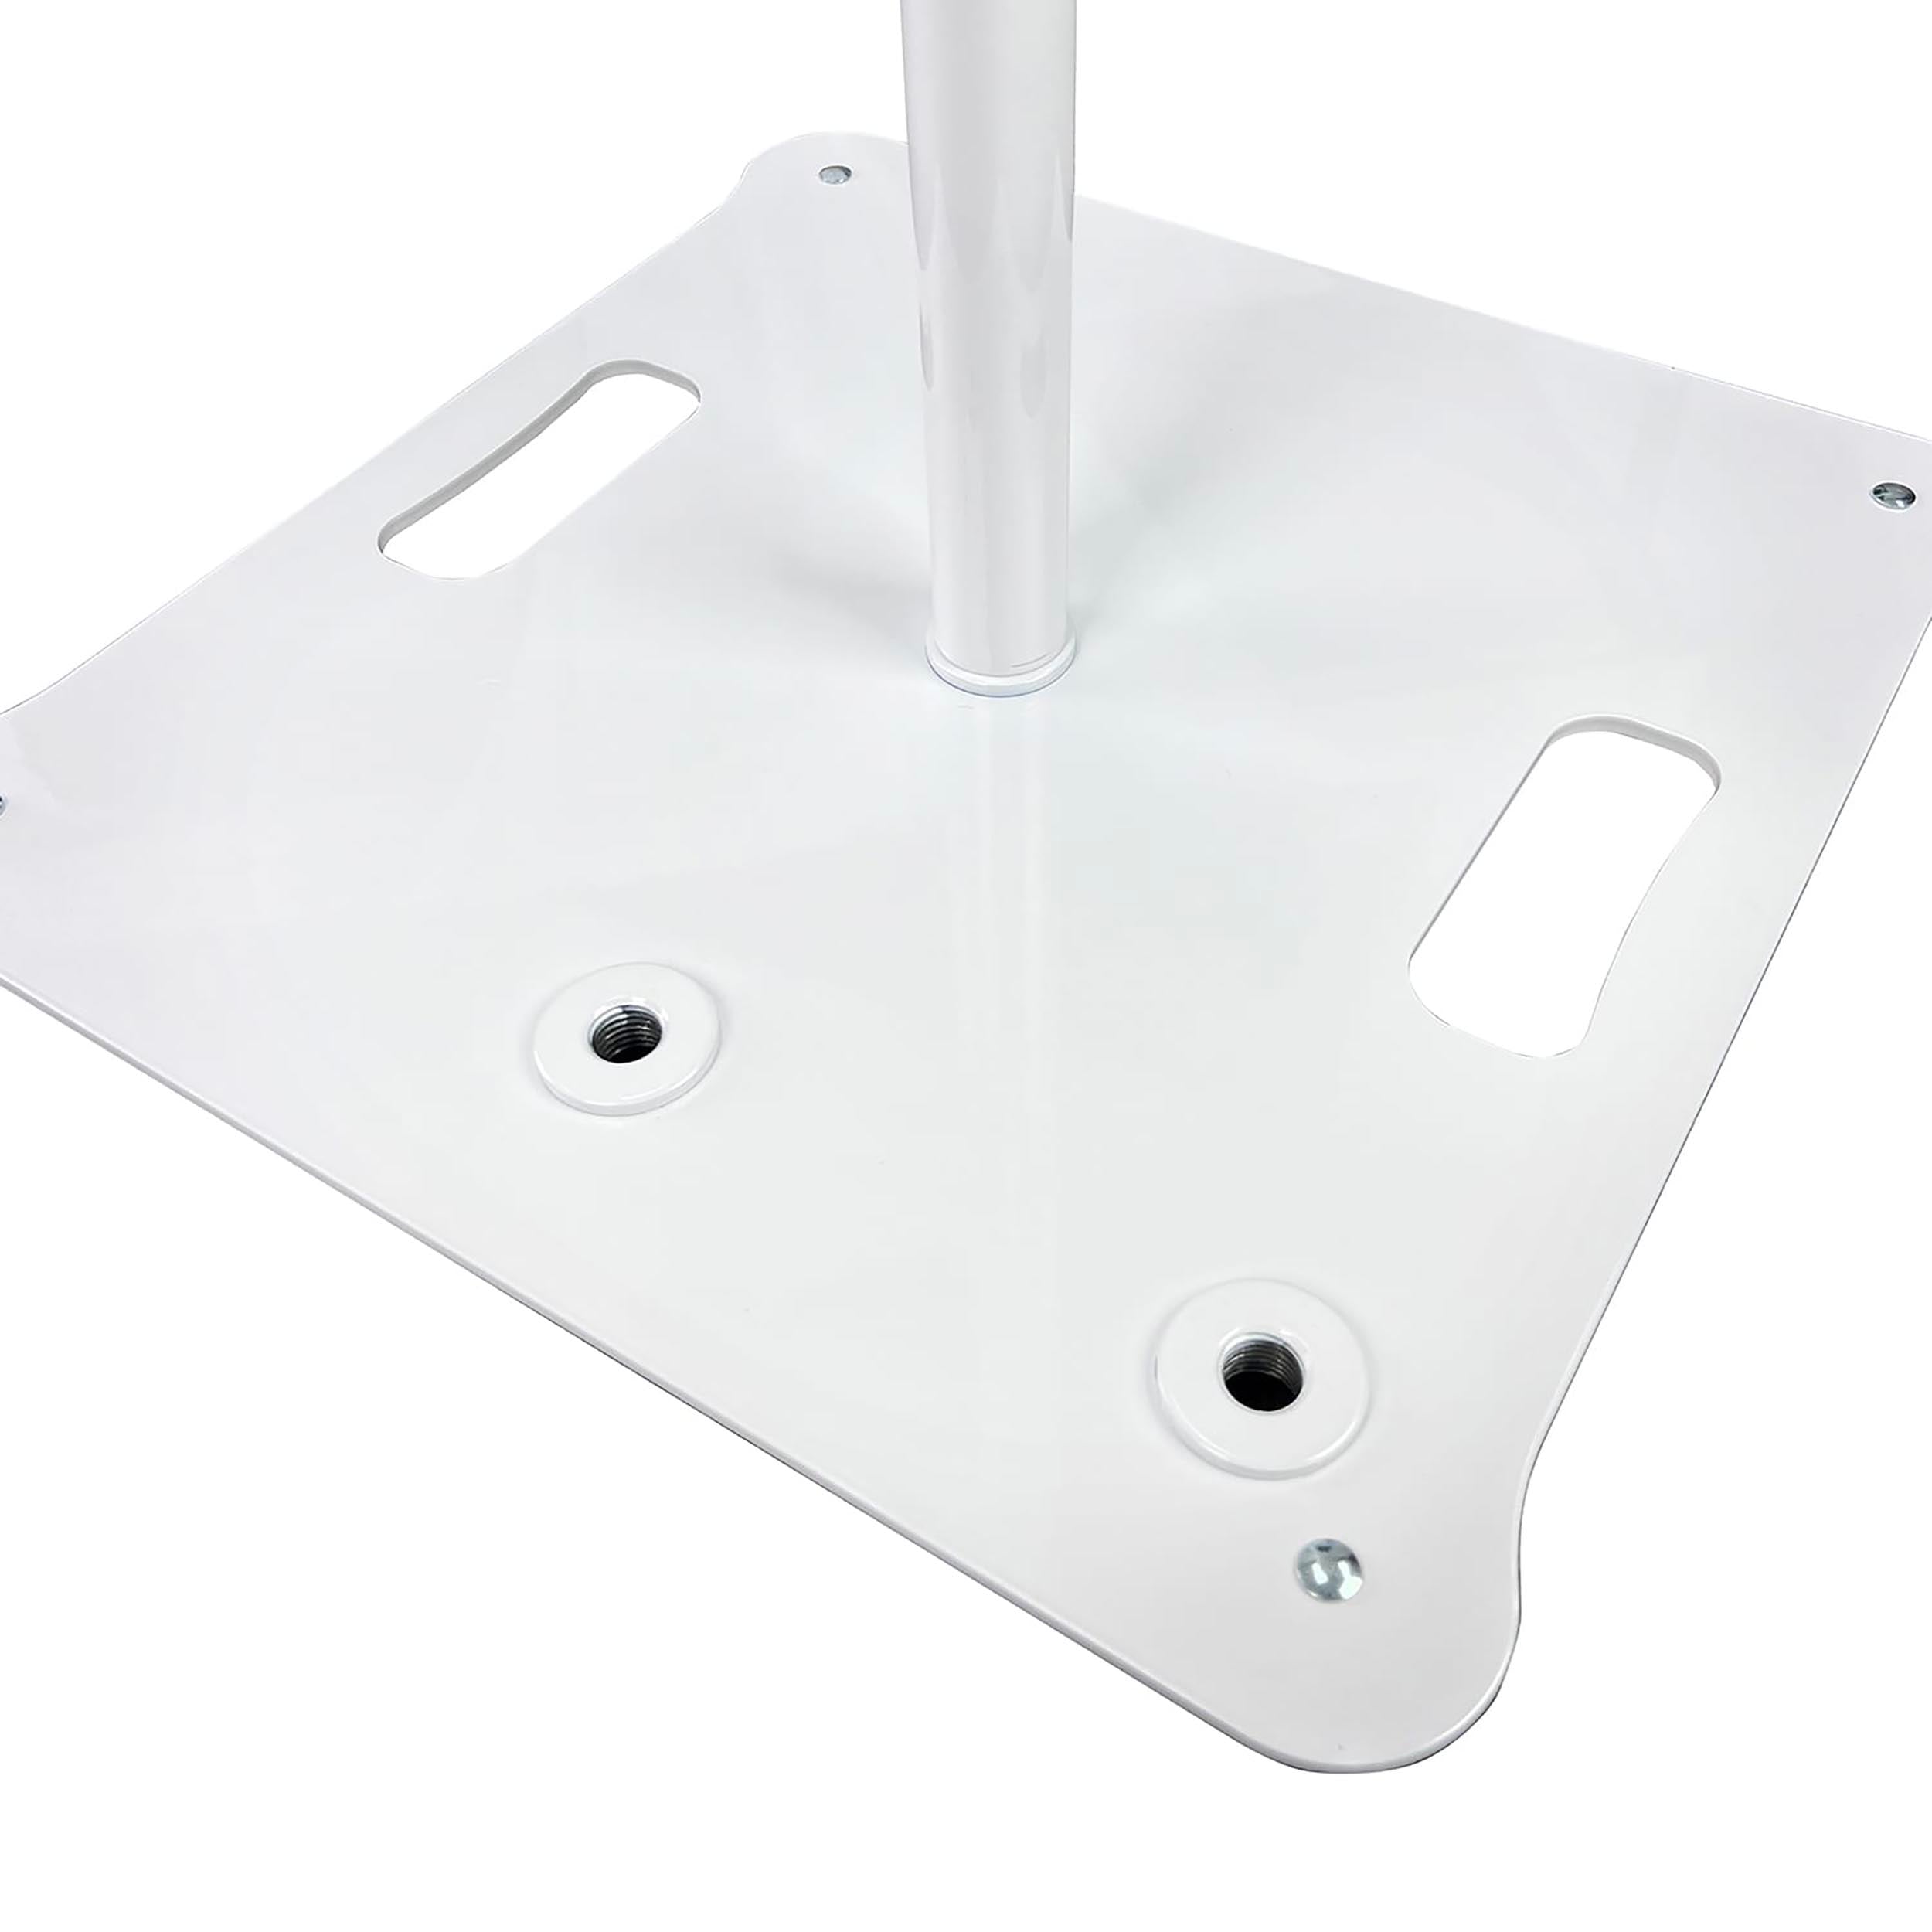 Odyssey LSBP96WHT, 96-Inch Tall White Speaker Stands - Pair by Odyssey